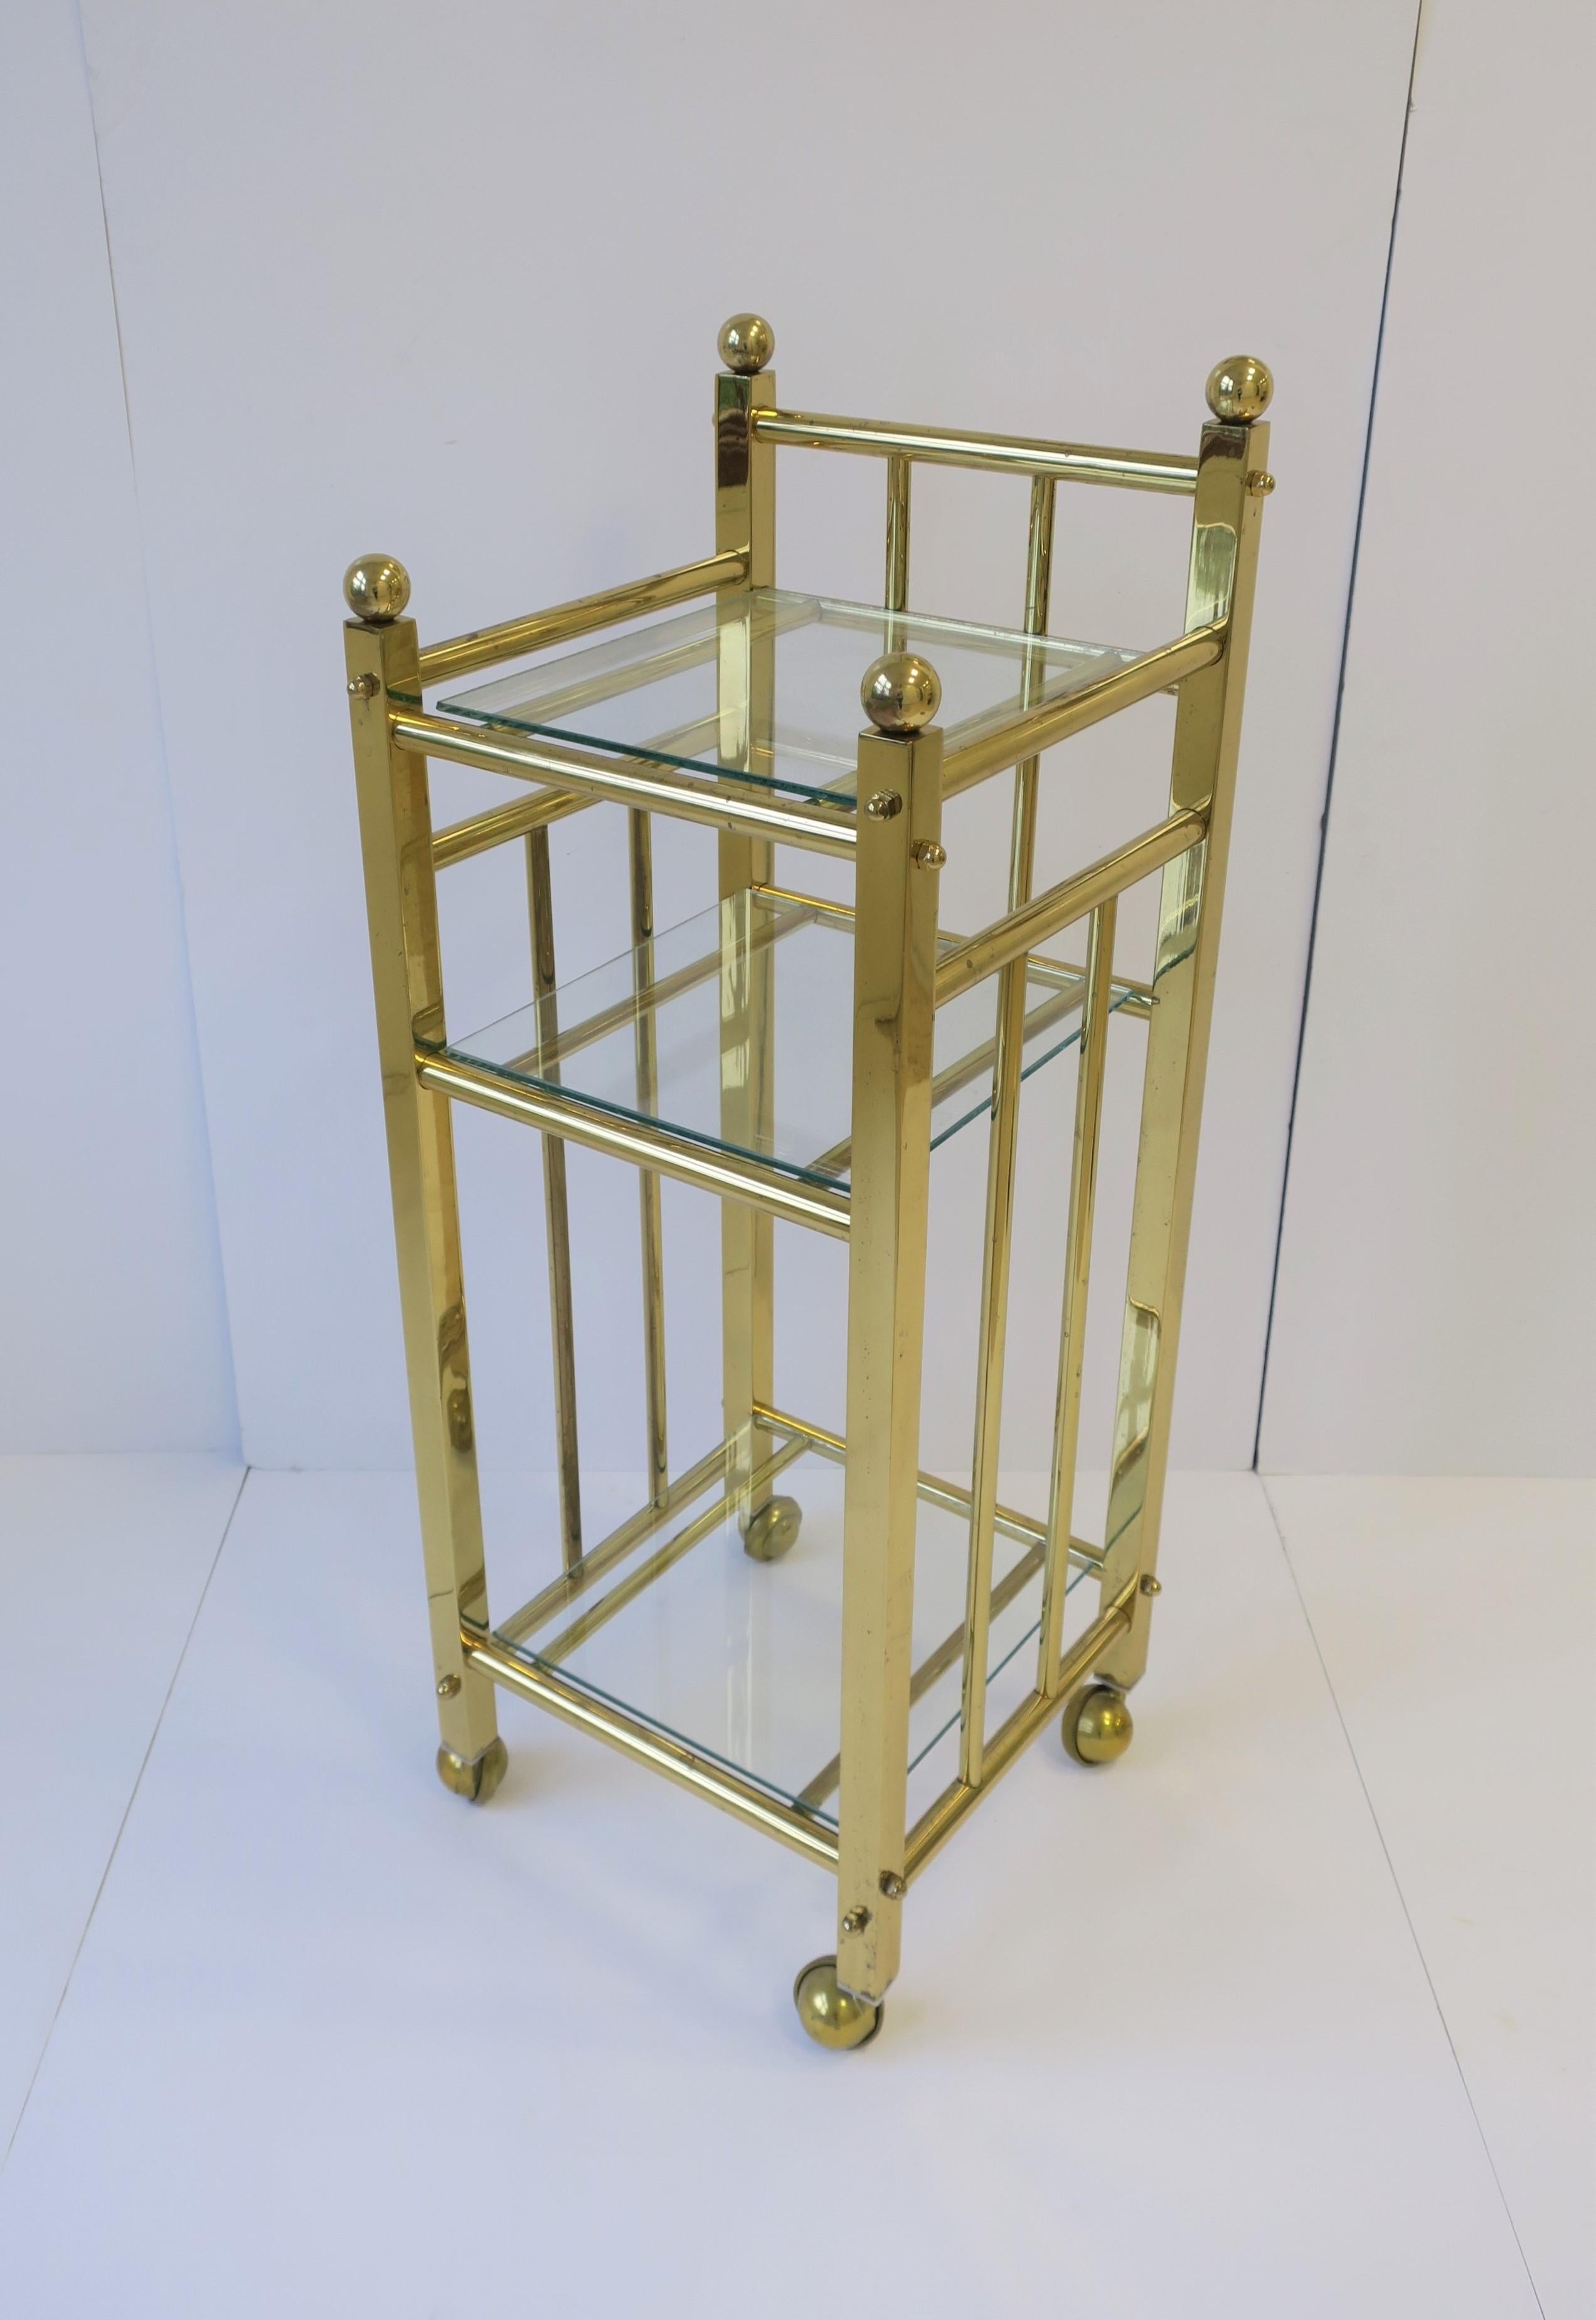 A brass and glass bar cart or étagère with shelf on brass caster wheels. Piece can work well as a small bar cart, bathroom caddy, etc. 

Piece measures: 13 in. x 13 in. x 33.5 in. H

    